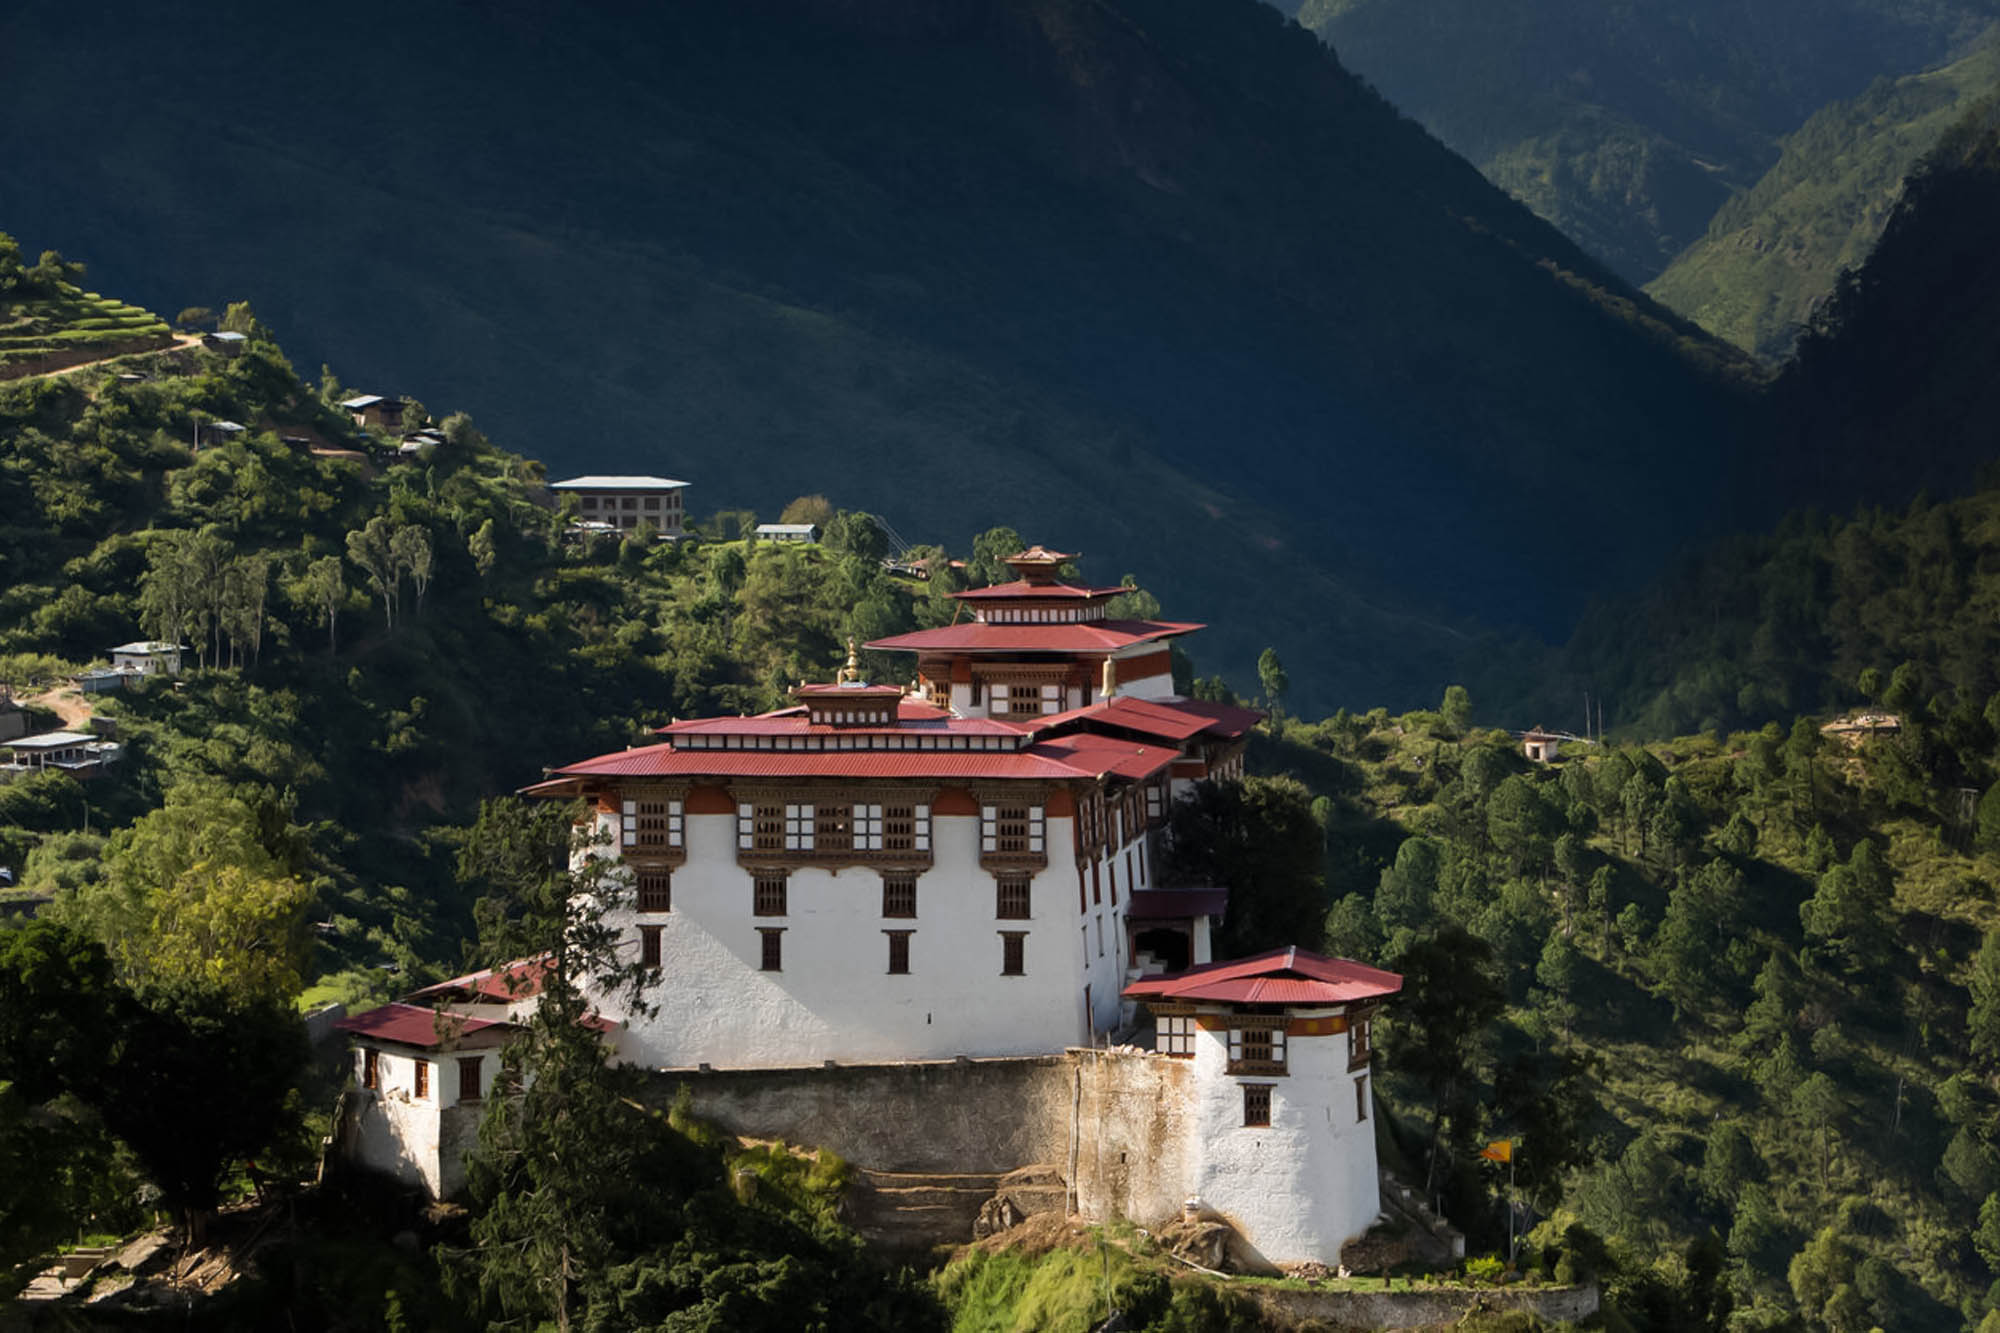 Best Things to Do in Mongar,Mongar Dzong,Where to Stay in Mongar,How to Get to Visit Mongar,Yagang Lhakhang,Aja Ney,Drametse Lhakhang